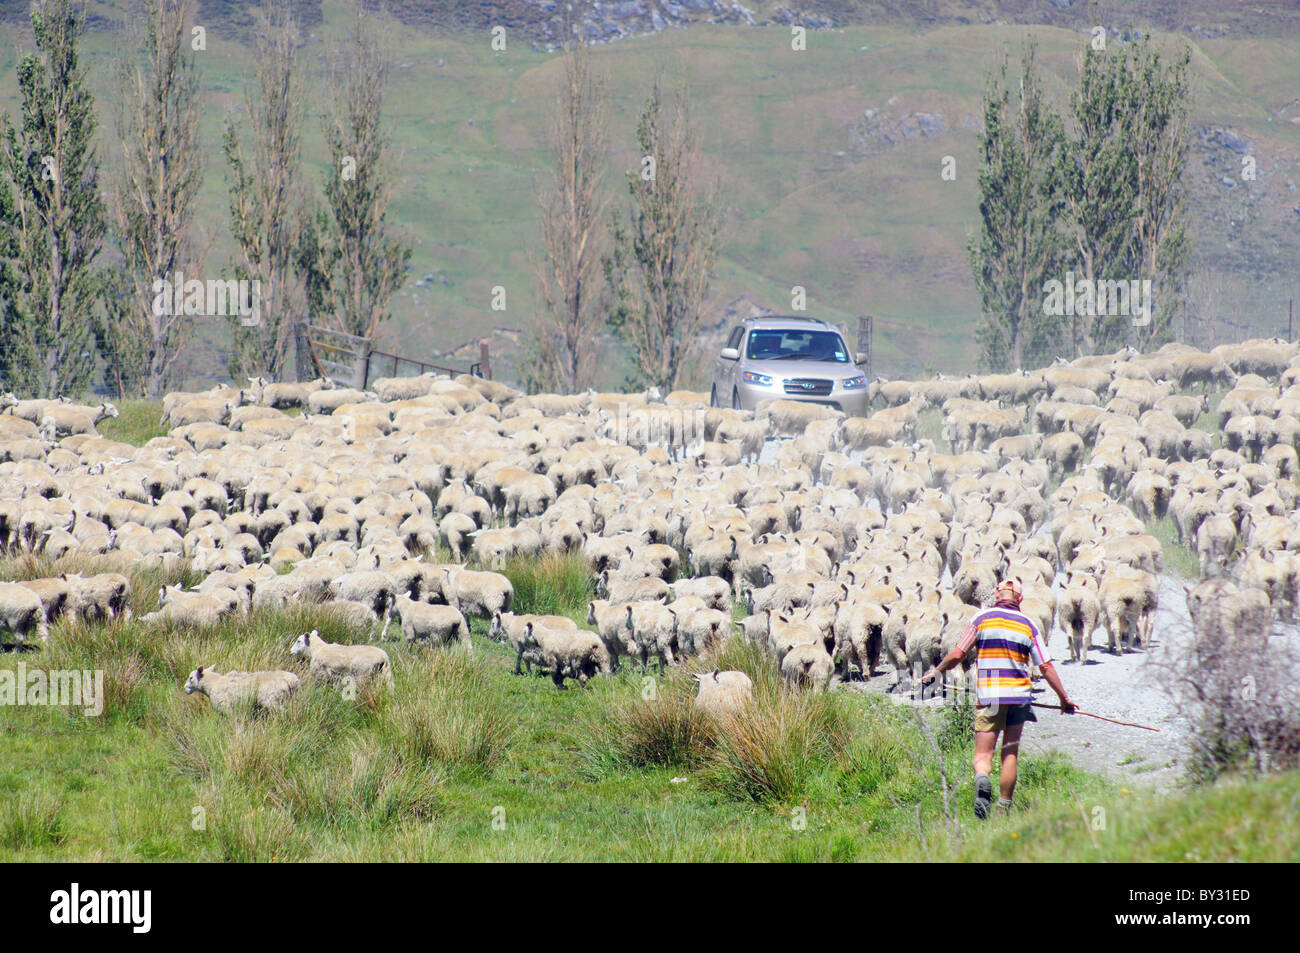 A shepherd and flock of sheep in new Zealand Stock Photo